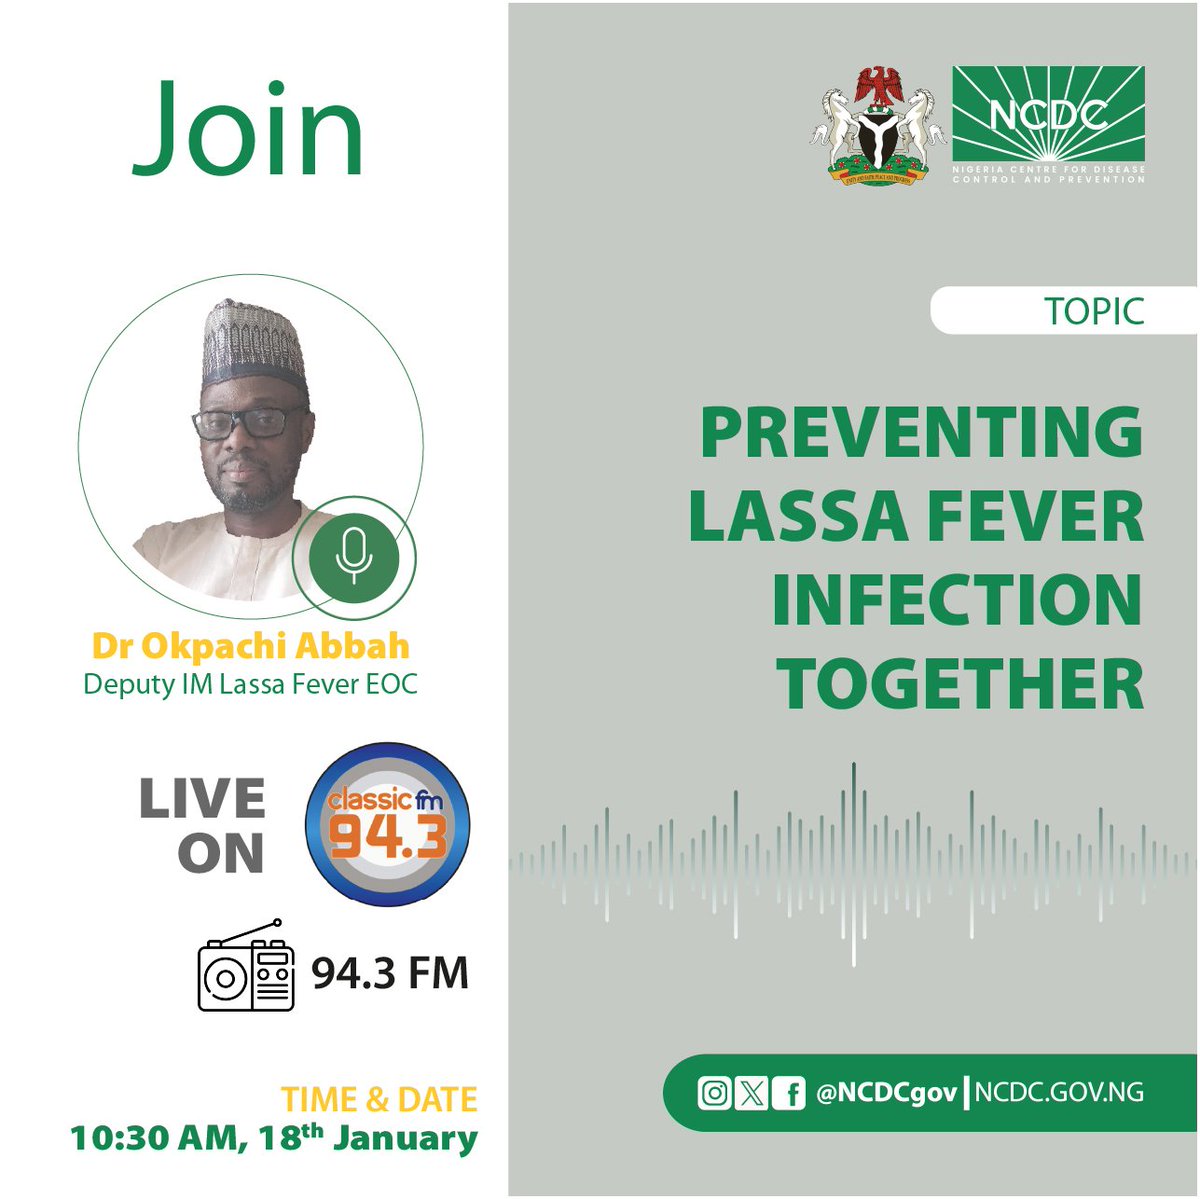 📣COMING UP Join our Lassa Fever EOC, Deputy Incident Manager, Dr Abbah Okpachi as he discusses the importance of a whole-of-society approach to preventing #LassaFever infection. Tune in LIVE on @ClassicFM943 to join the conversation 📻 94.3 FM 🕥 10:30 am